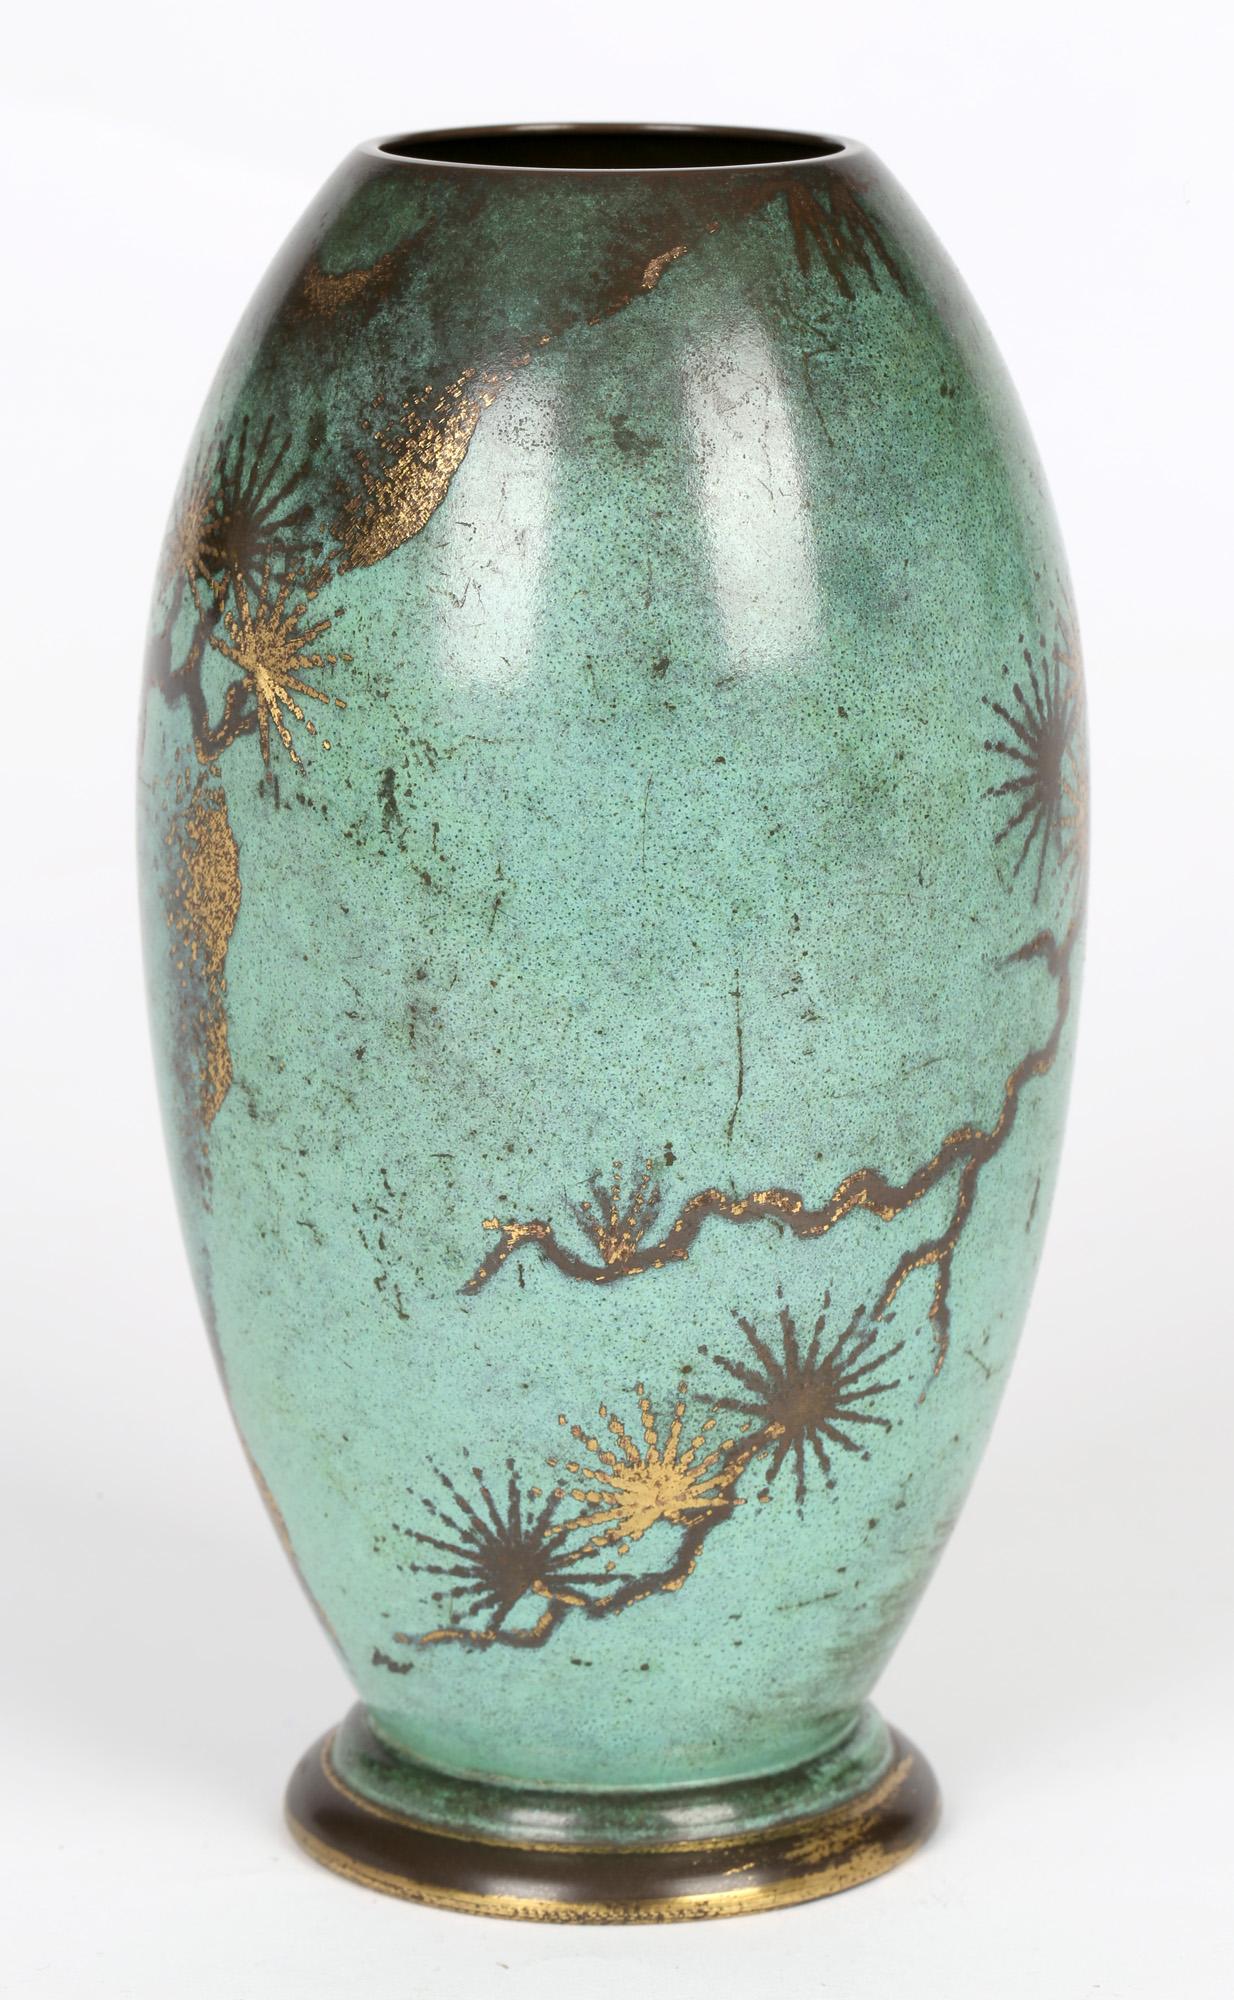 A stunning WMF (Württembergische Metallwarenfabrik) patinated copper Ikora vase decorated with a stylized pine cone design by Paul Haustein (1880-1944) and dating from around 1920. This very finely made vase has a rounded pedestal foot rim with an